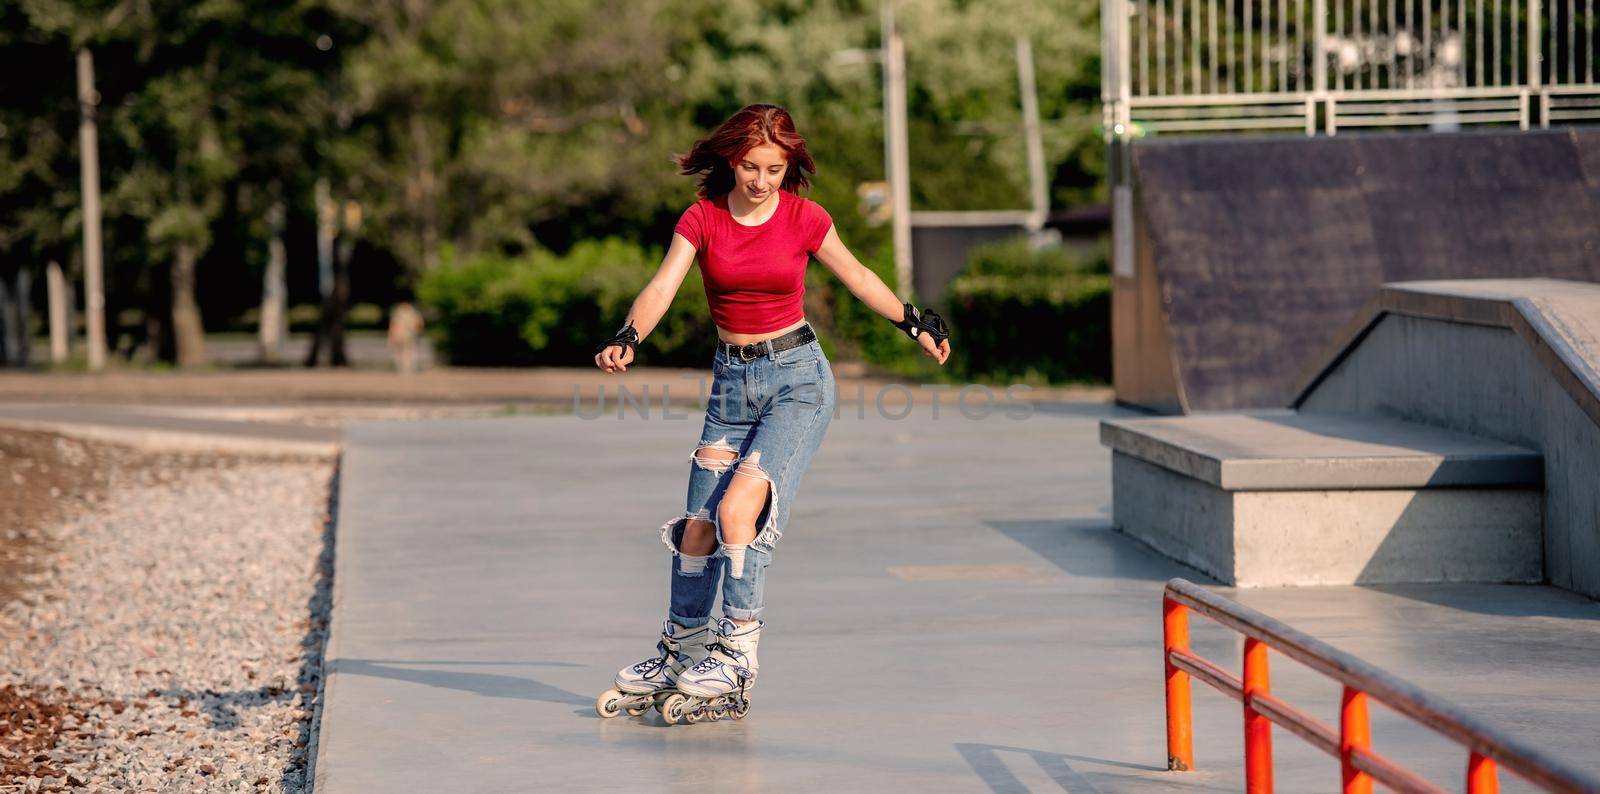 Pretty girl on roller skates practicing riding in the city in sunny day. Female teenager rollerblading at summer outdoors